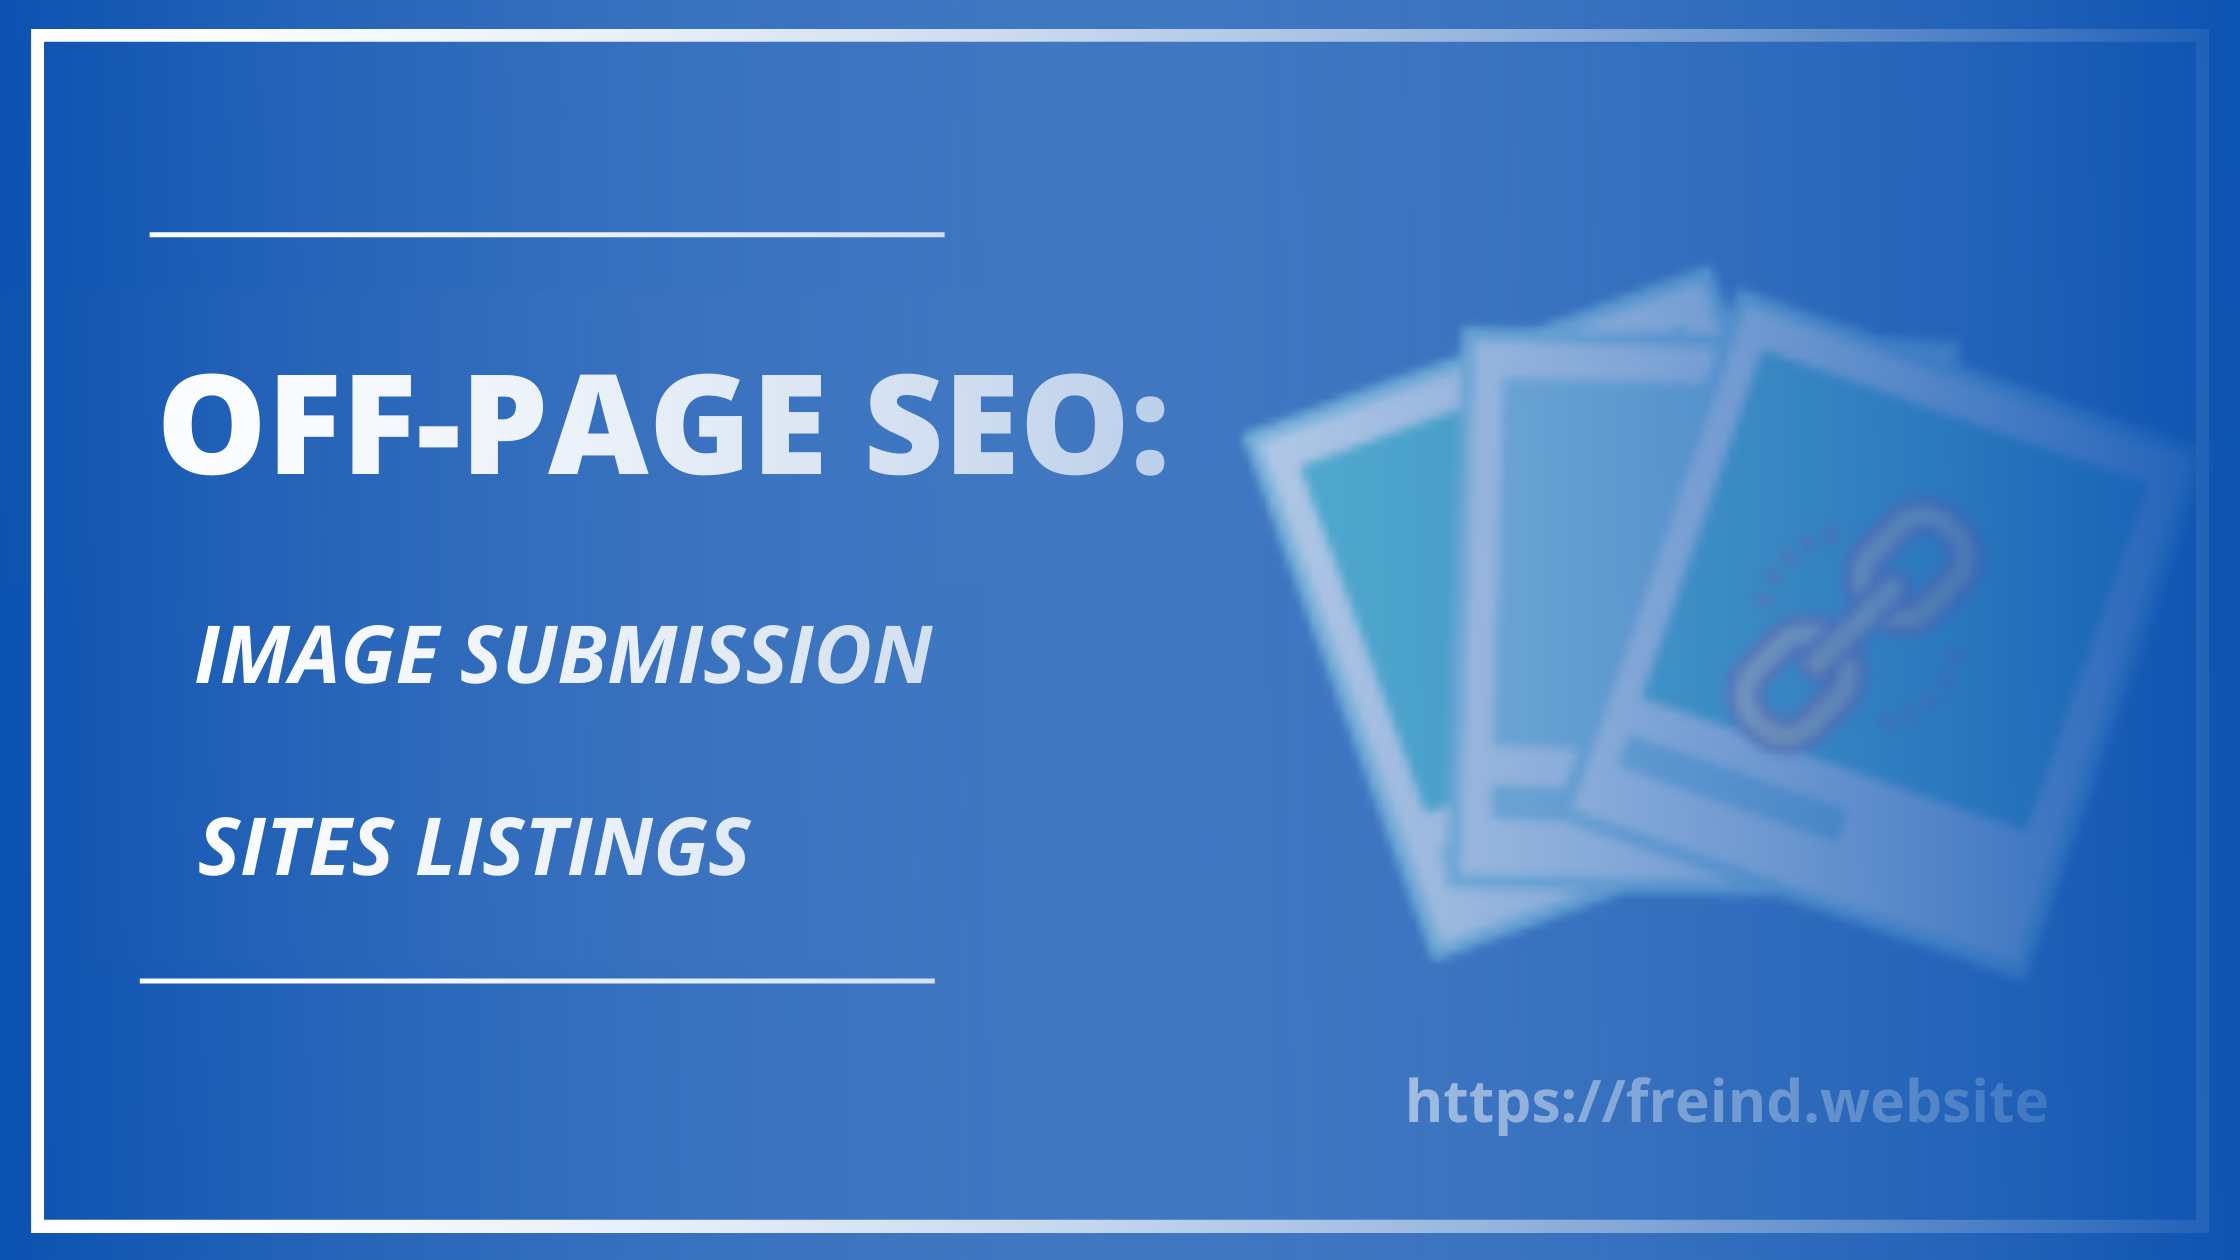 OFF-PAGE SEO: IMAGE SUBMISSION SITES LISTINGS 2022